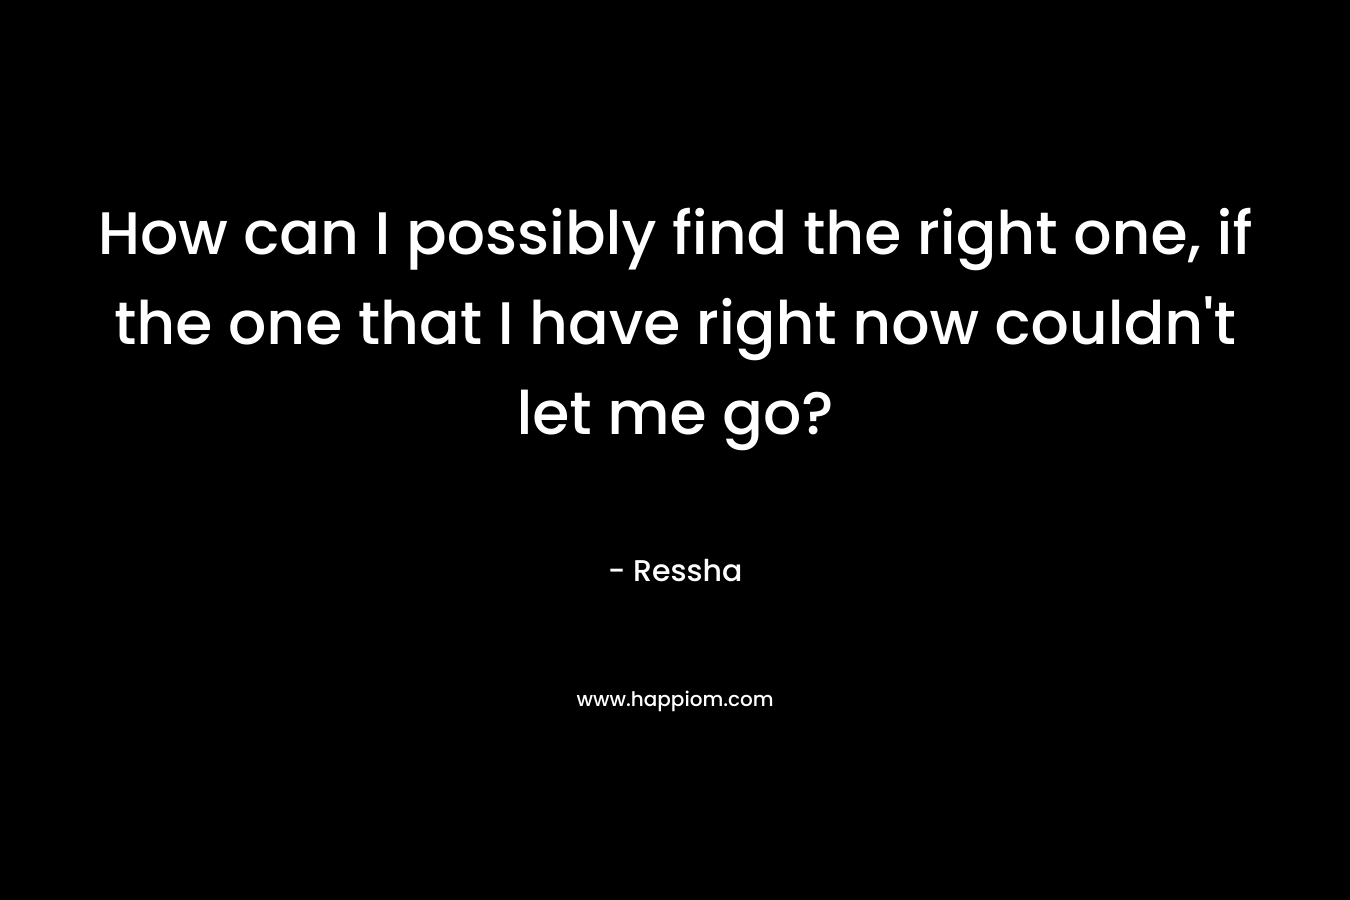 How can I possibly find the right one, if the one that I have right now couldn’t let me go? – Ressha